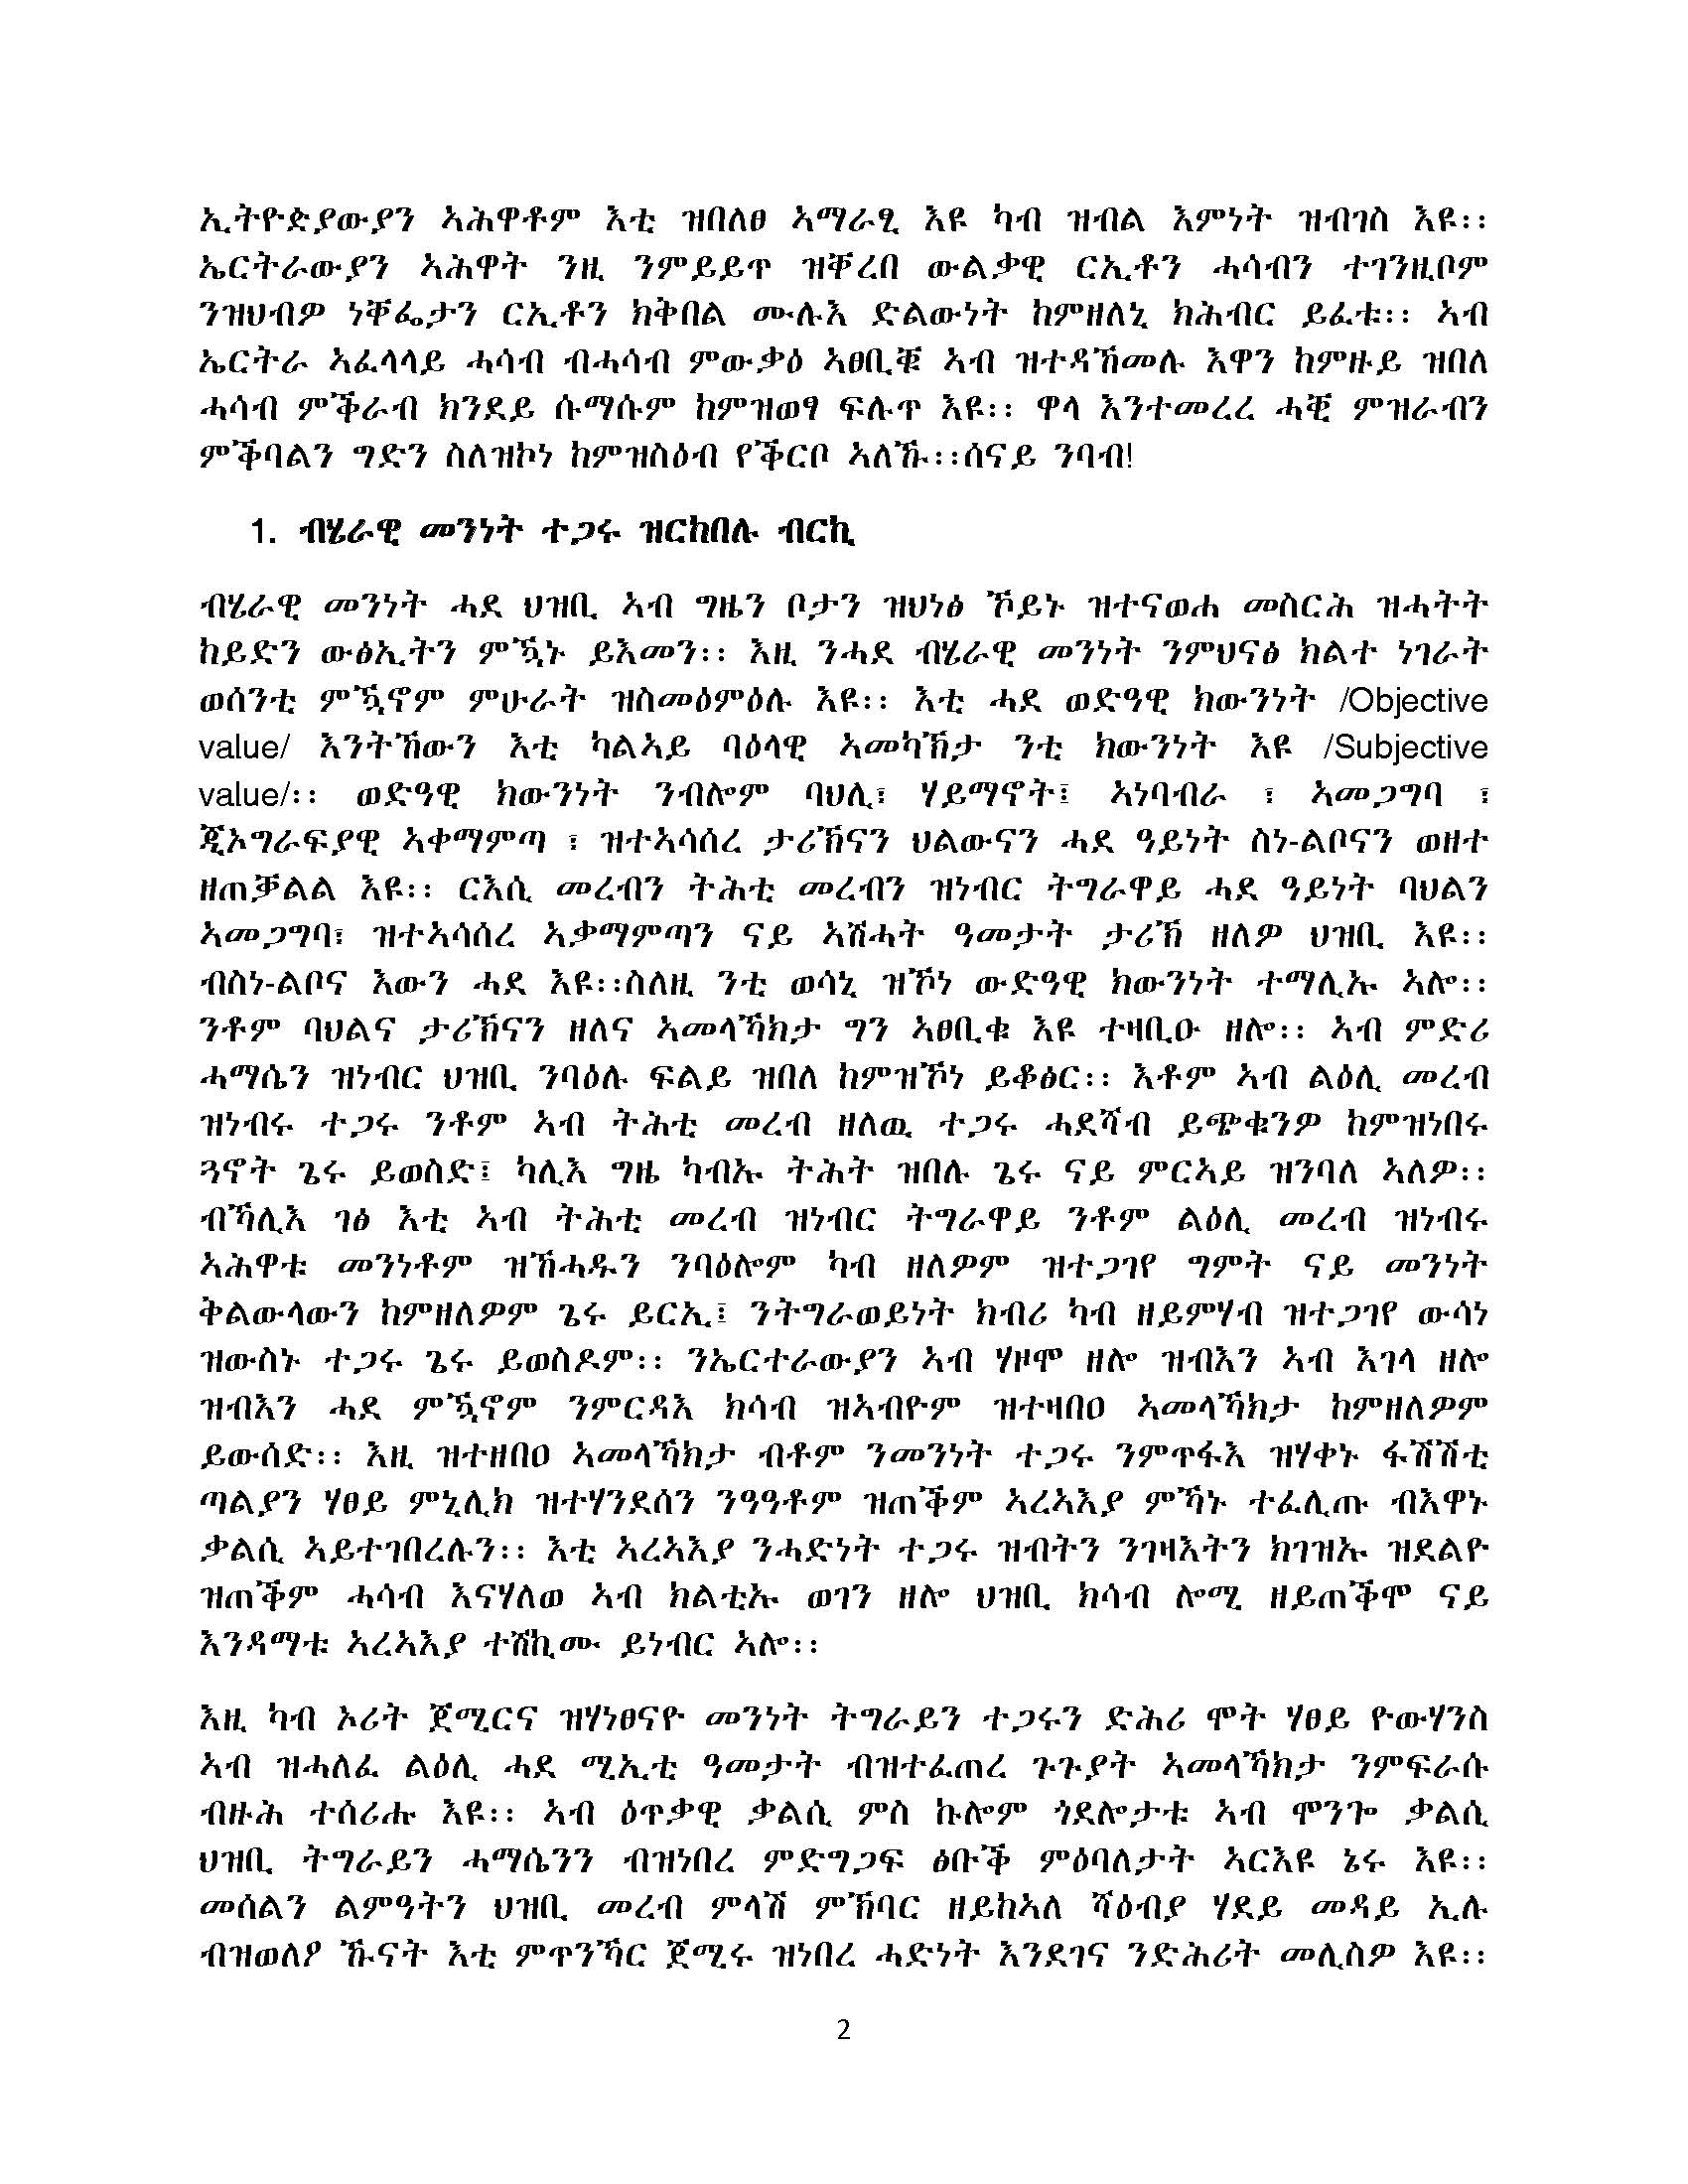 one-step-forward-for-tigreans-and-eritreans_page_02